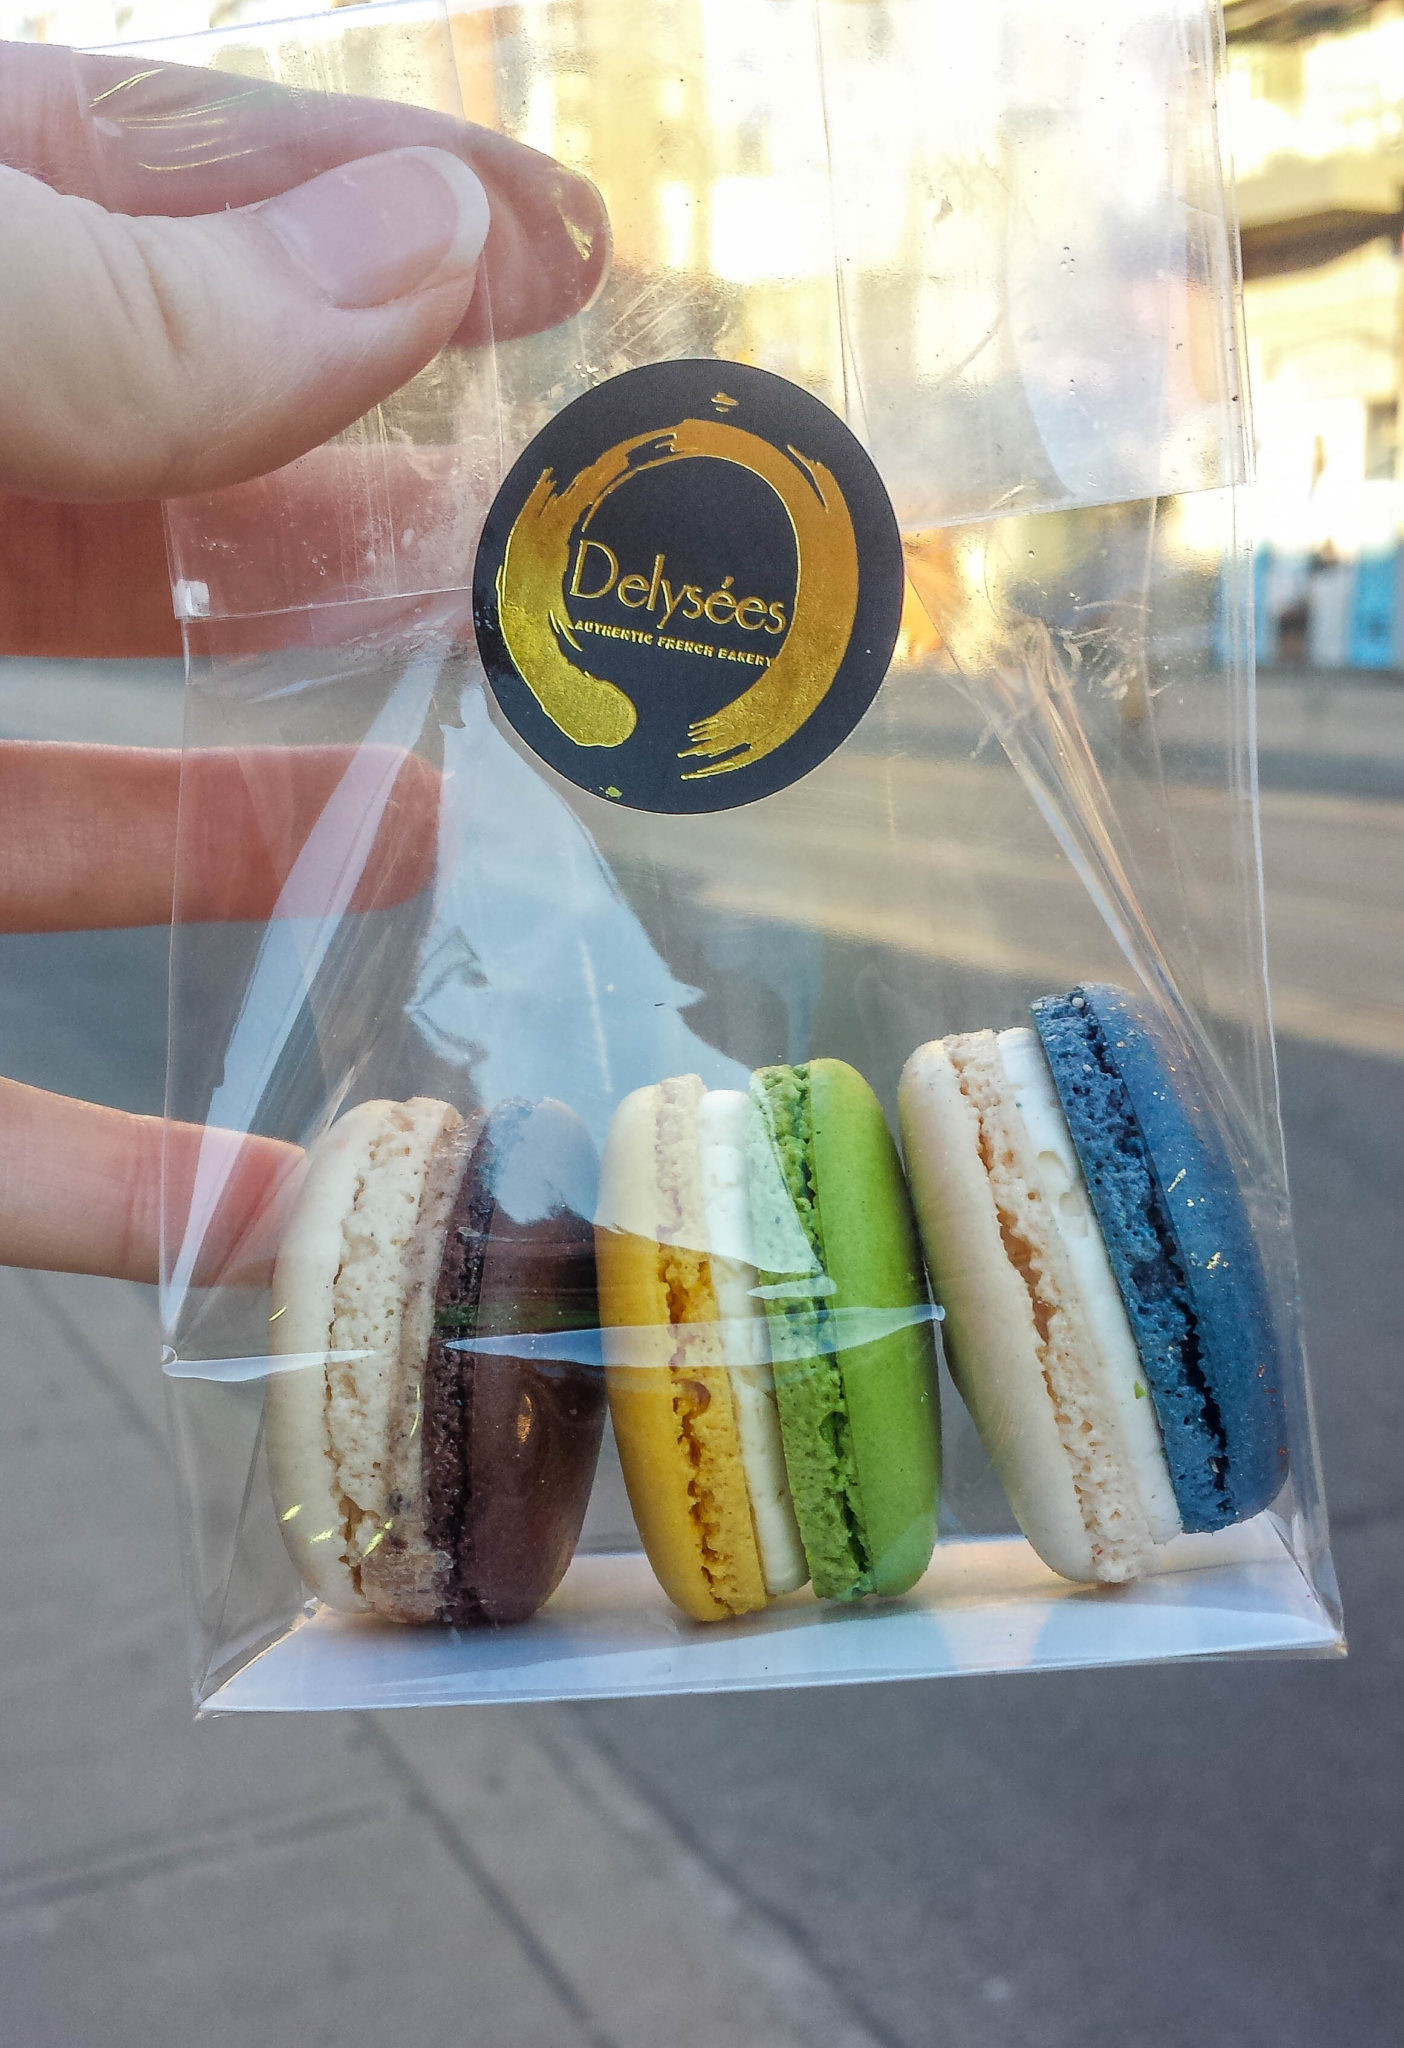 Three macarons in a clear plastic bag from Delysees Toronto